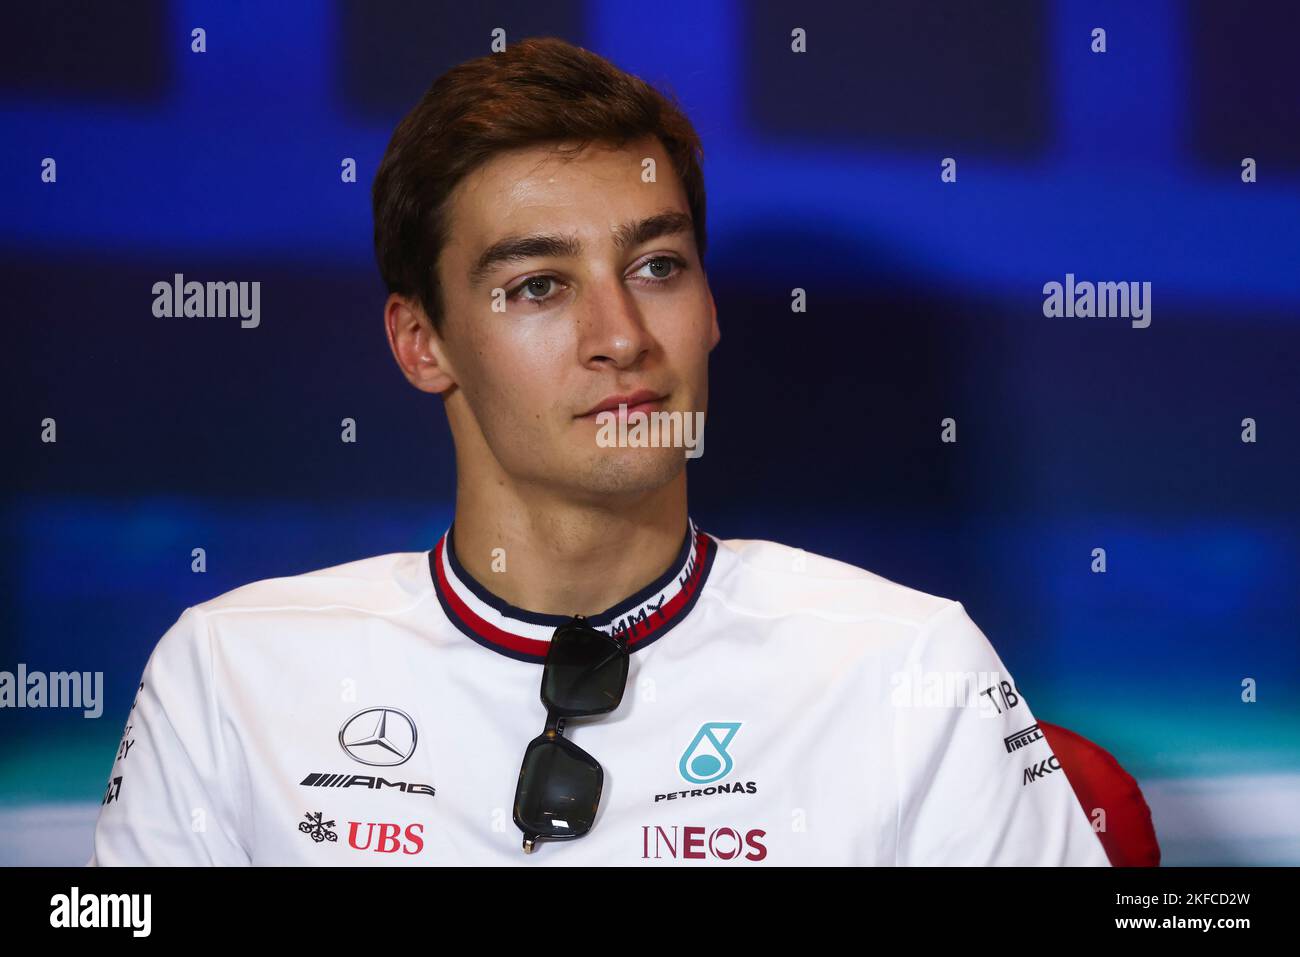 Abu Dhabi, United Arab Emirates. November 17, 2022 George Russell of Mercedes attends a press conference during  Formula 1 Abu Dhabi Grand Prix at Yas Marina Circuit on November 17, 2022 in Abu Dhabi, United Arab Emirates. Stock Photo